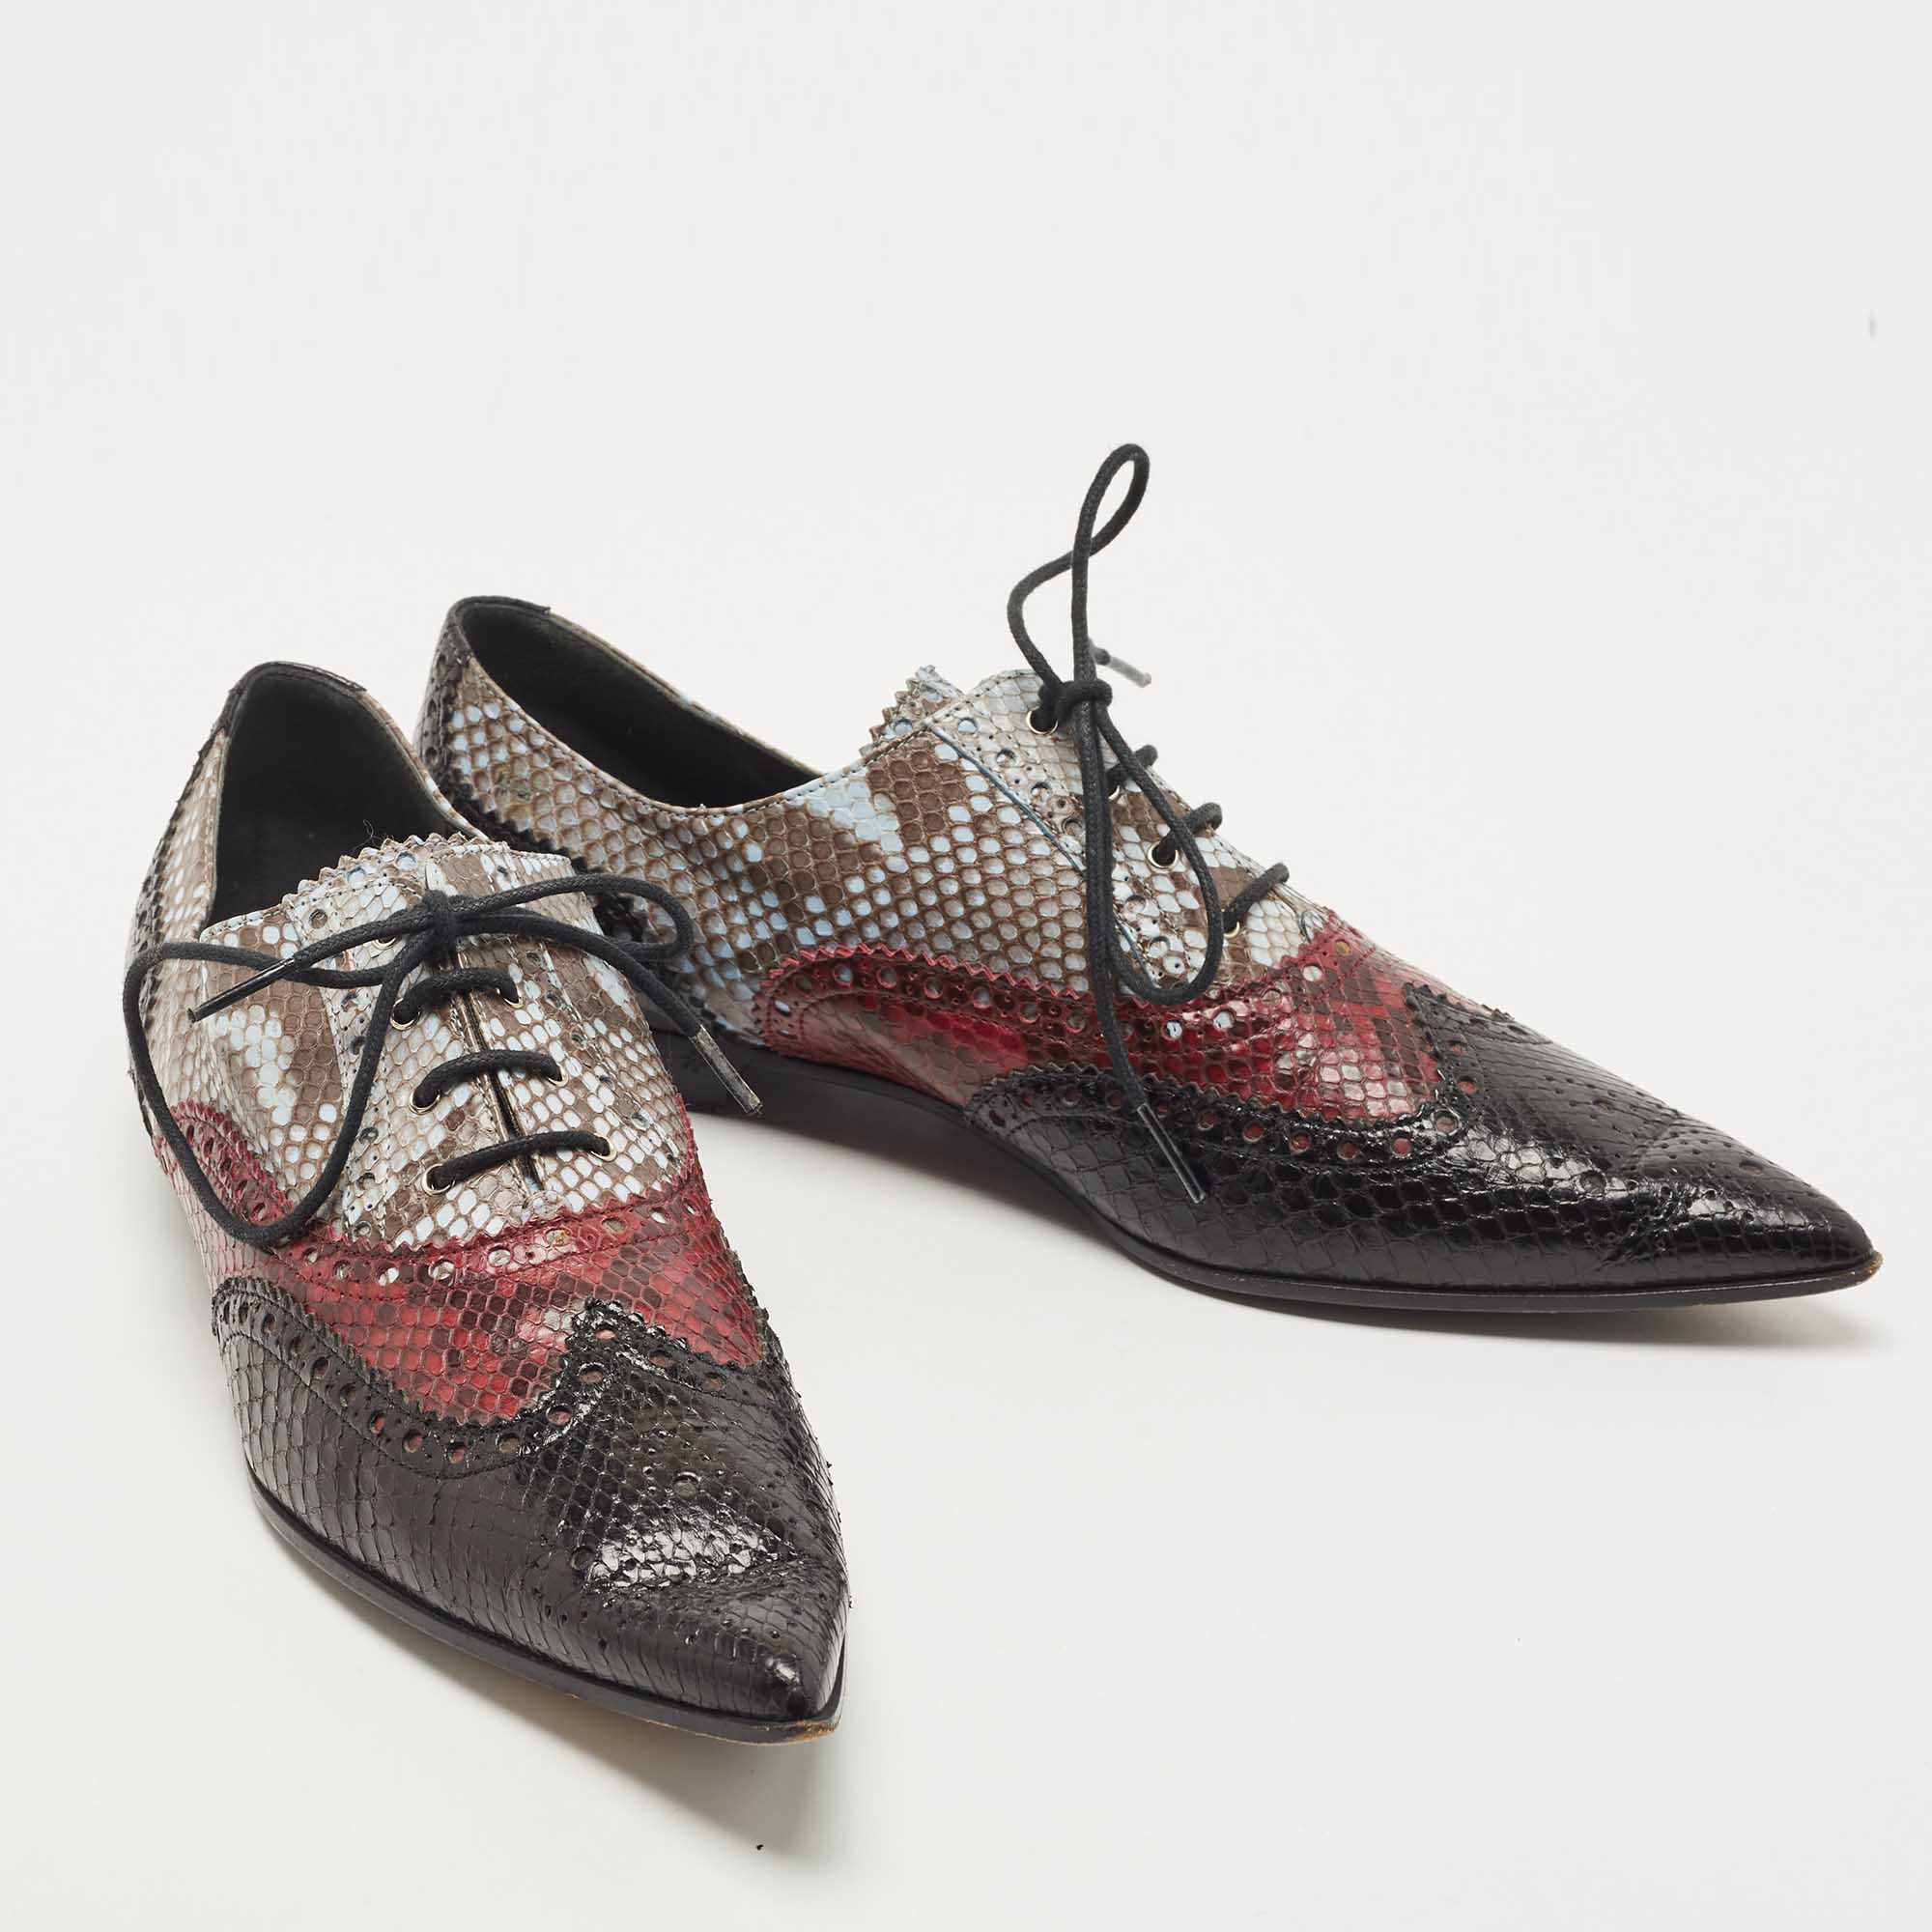 Gucci Multicolor Python Leather Brogue Pointed Toe Oxfords Size 39.5